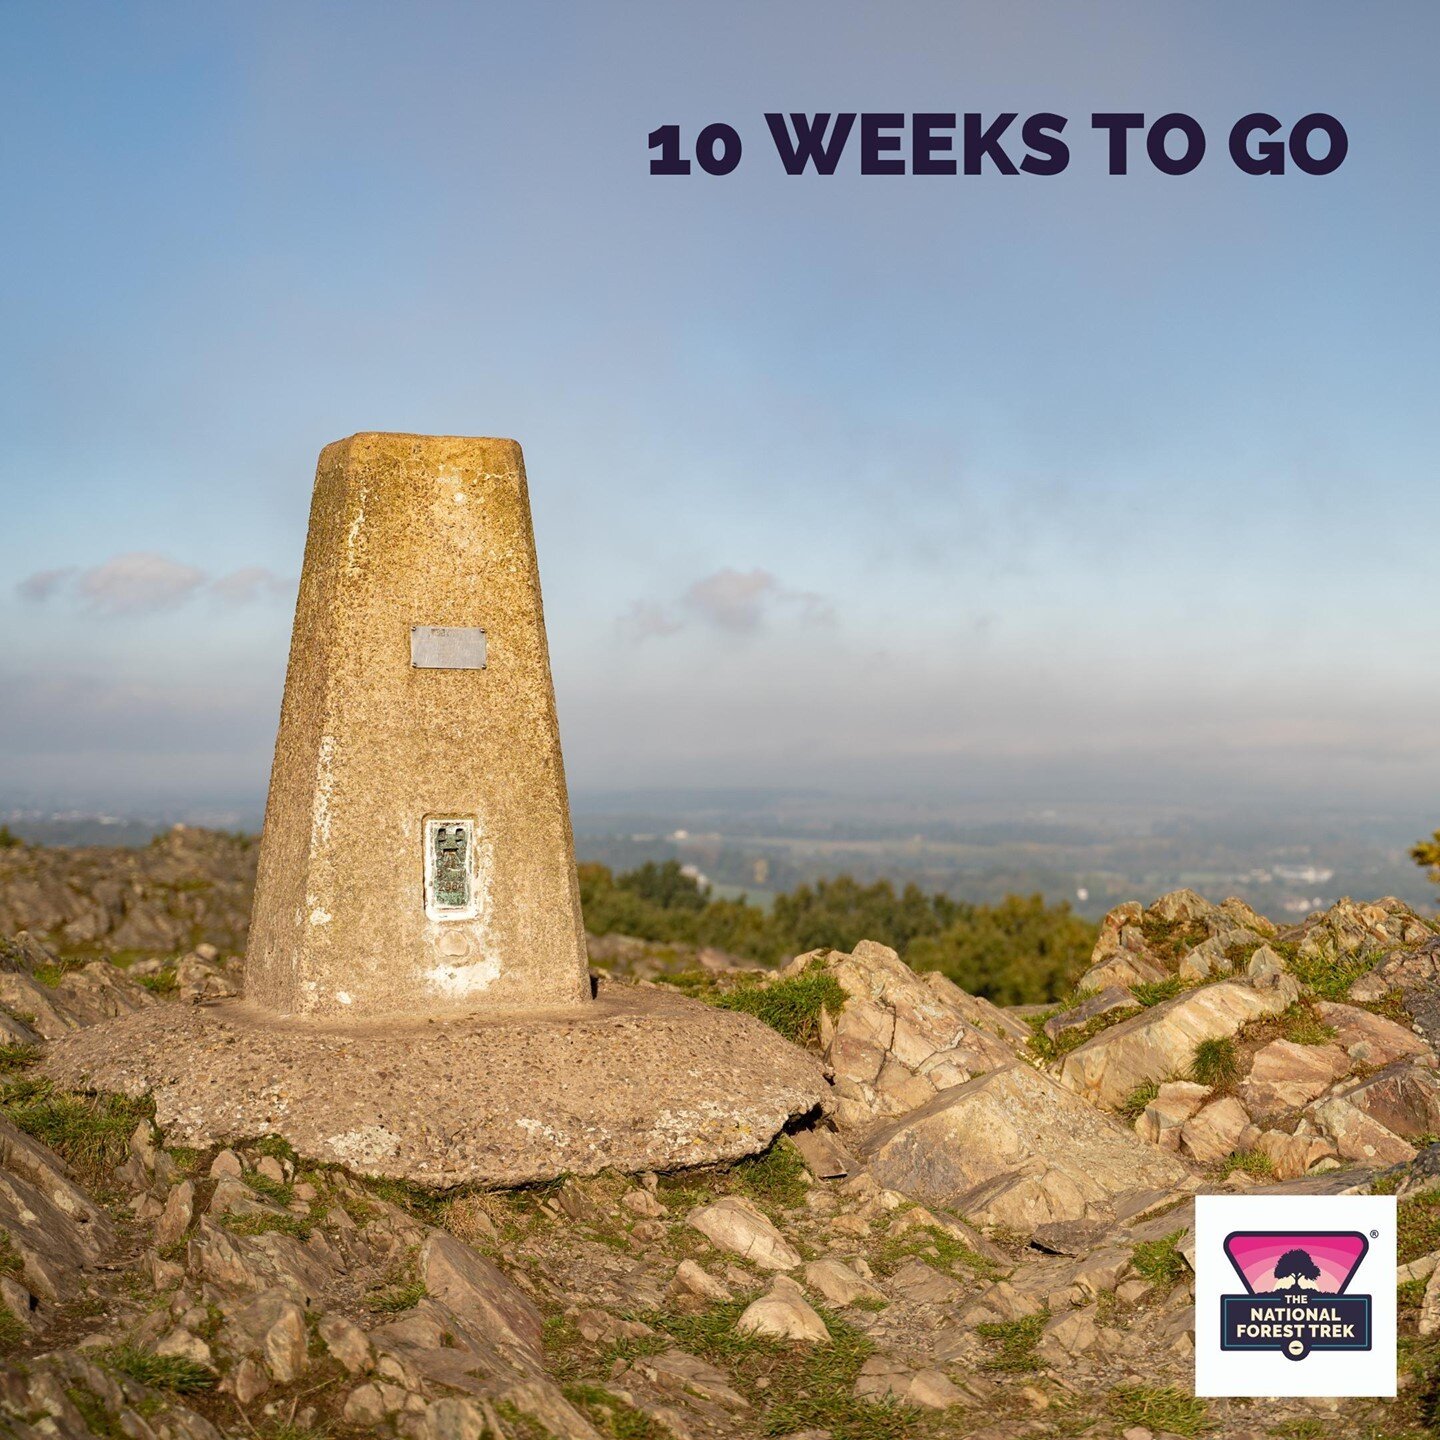 In just 10 weeks time our 3-day trekkers will head towards an early highlight will be the view from atop Beacon Hill.⁠
⁠
The day will end at Ashby-De-La-Zouch 30 miles later.⁠
⁠
There is still time to join this epic adventure: https://www.nationalfor